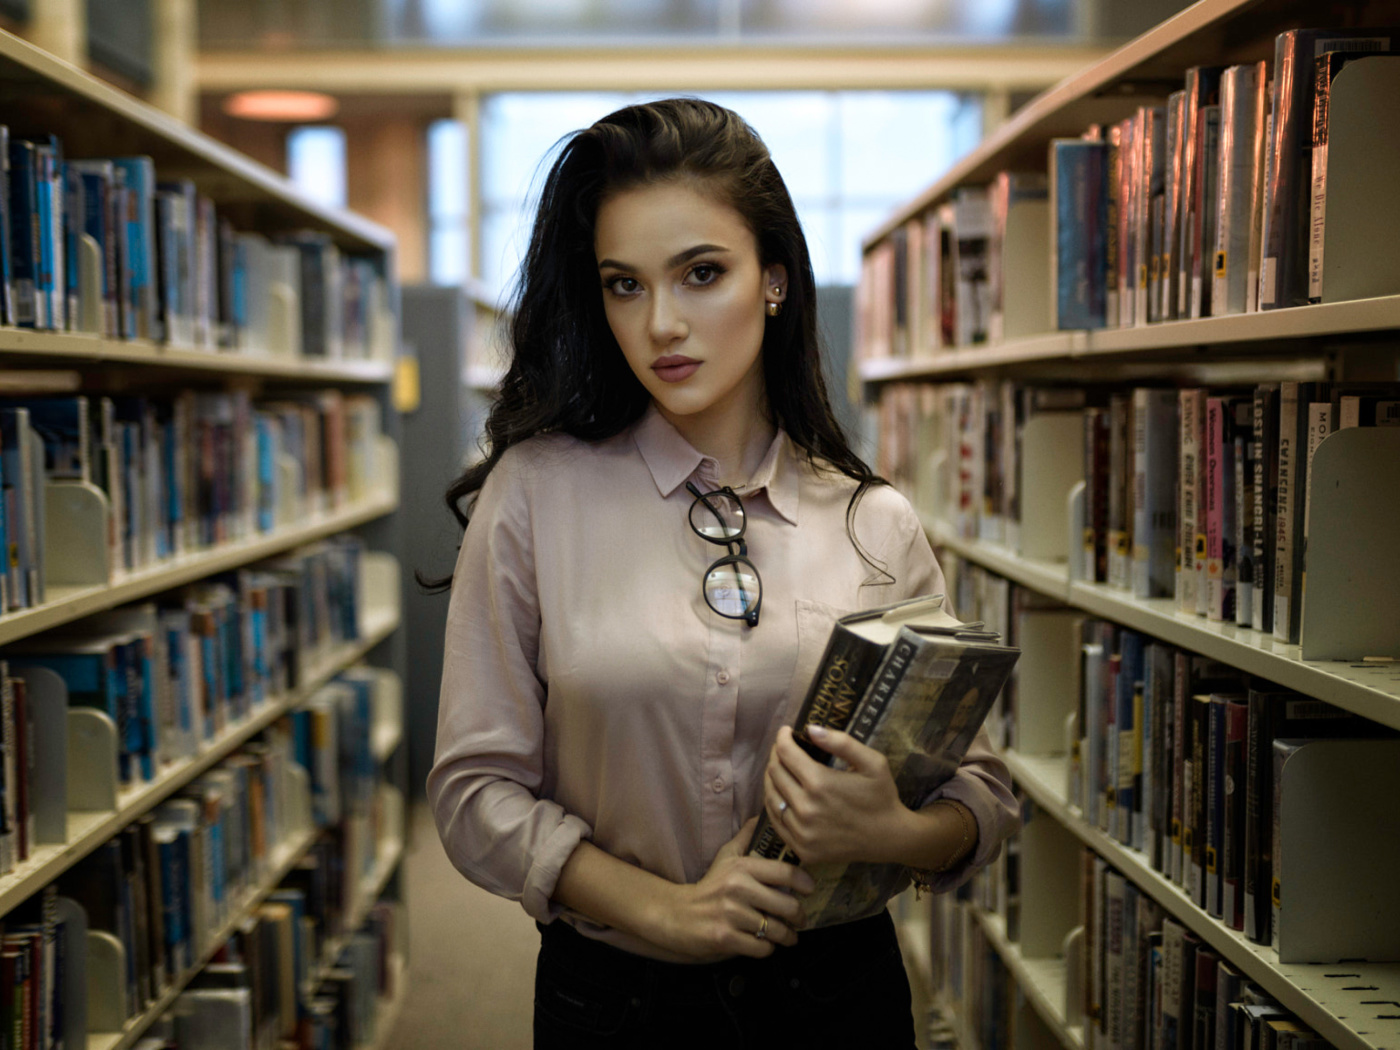 Girl with books in library wallpaper 1400x1050